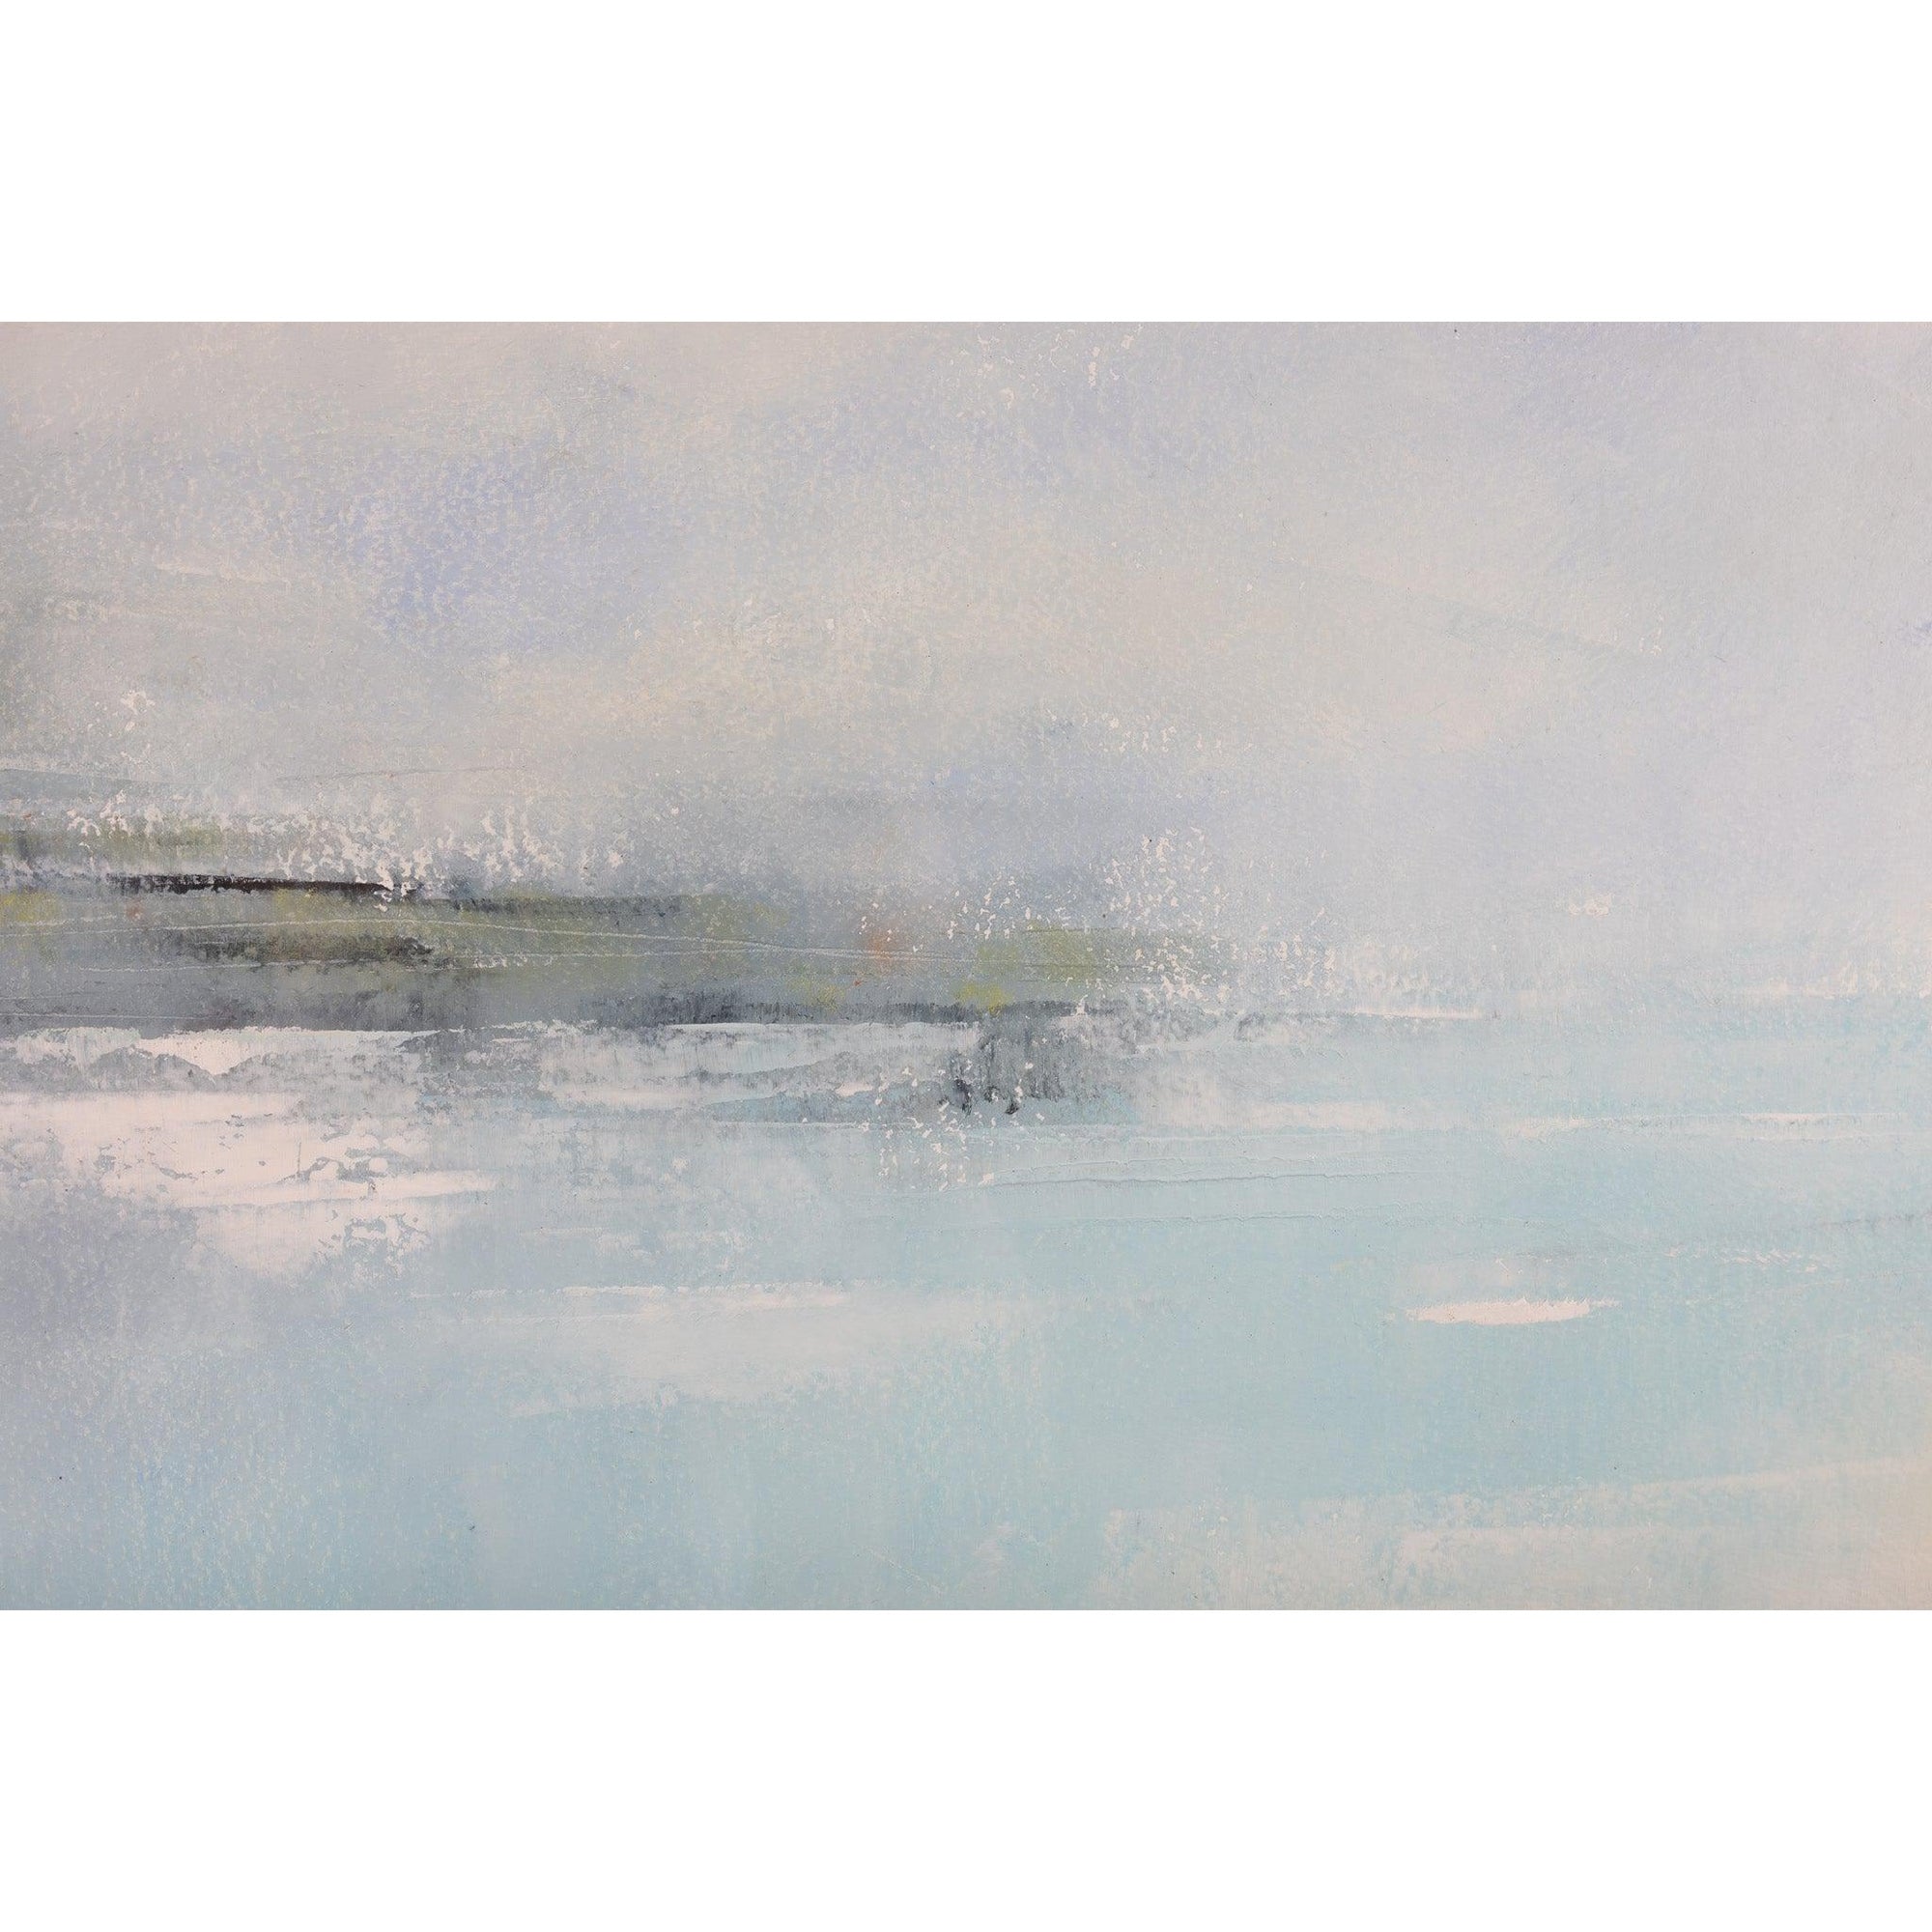 'Over the River' oil on paper by Ben Lucas, available at Padstow Gallery, Cornwall